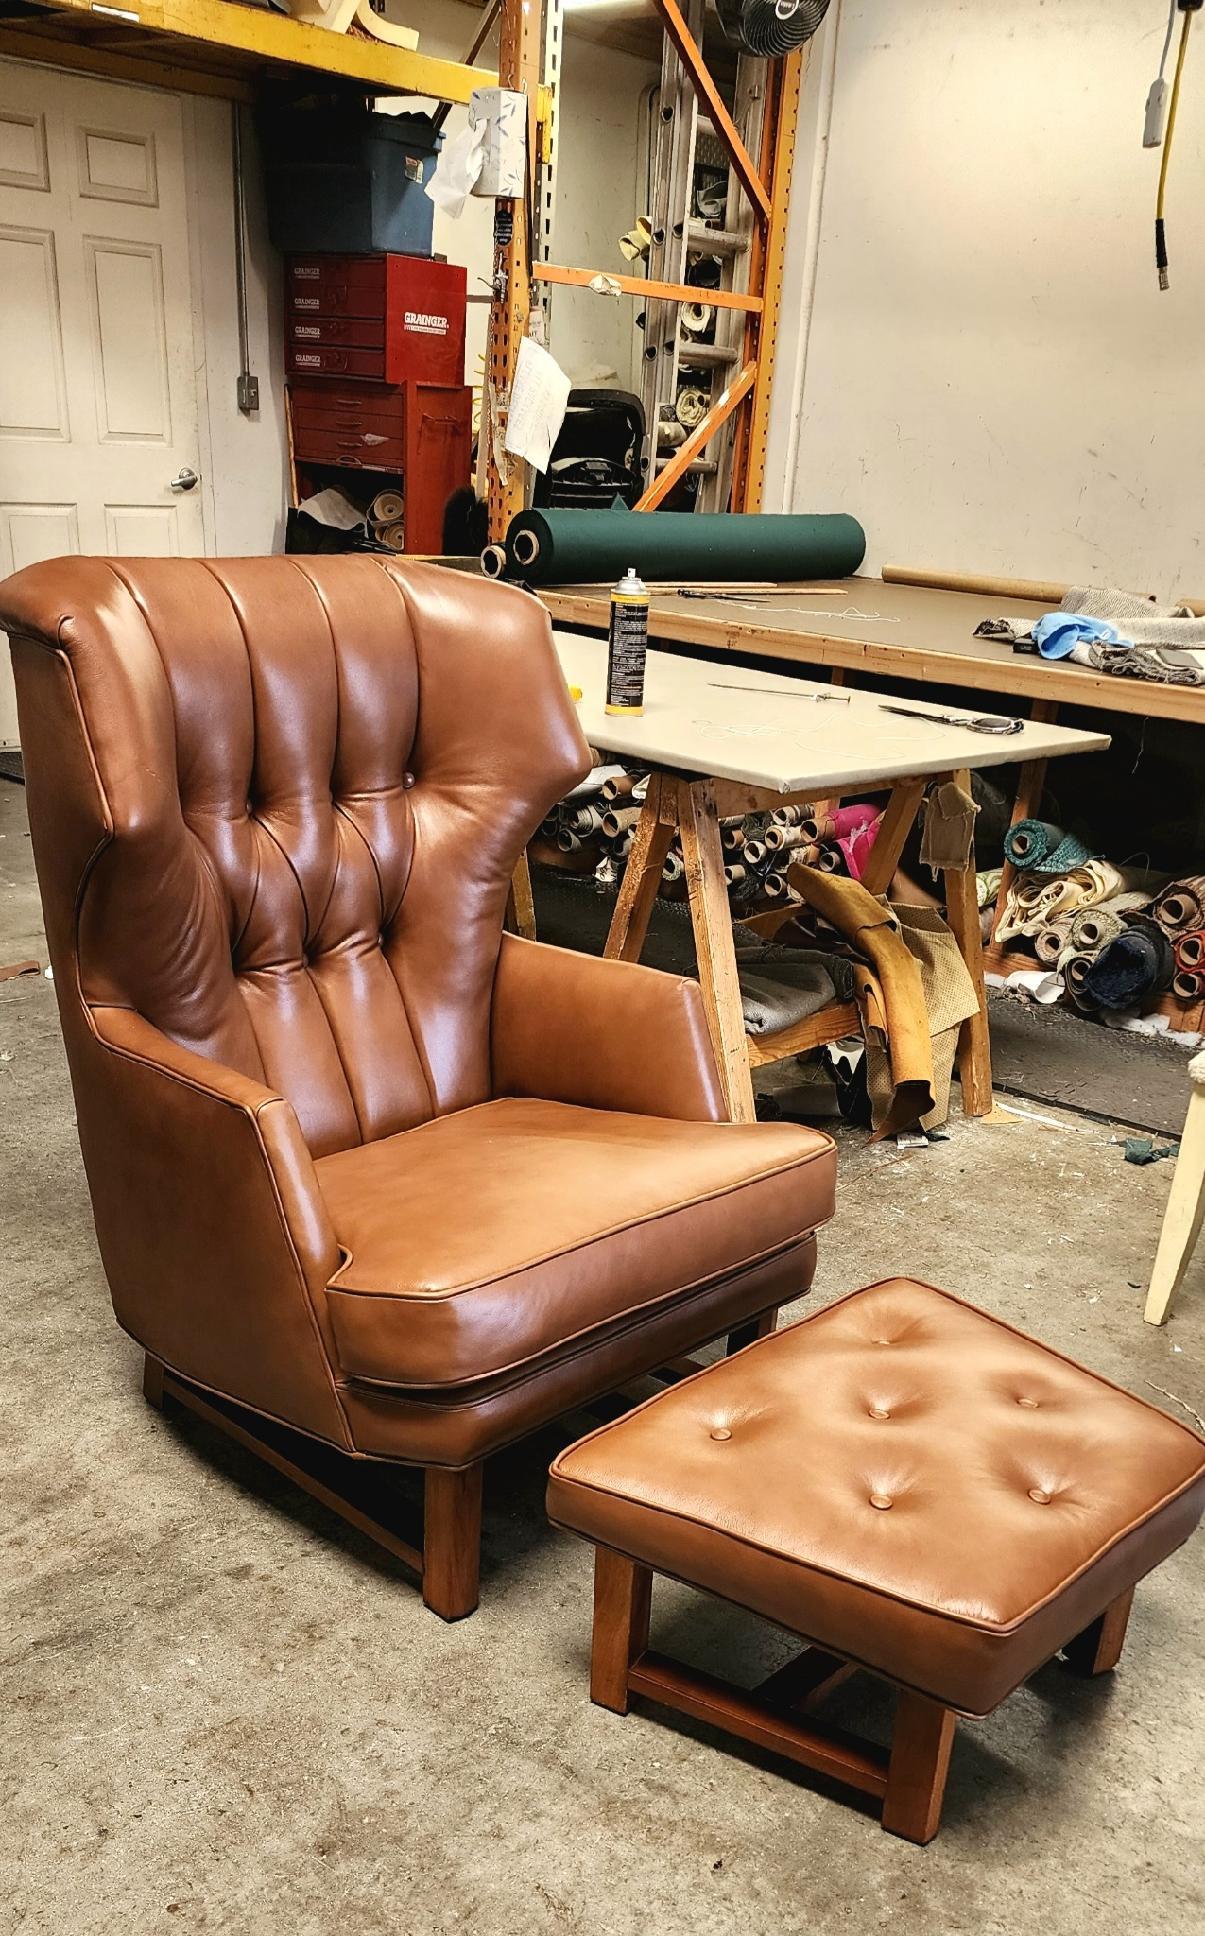 A beautifully redone and reupholstered wing back chair designed by Edward Wormley for Dunbar in the late 1950’s. I have included a couple of before photos of the construction. The legs are nicely sculpted with an angled side. They are made of walnut